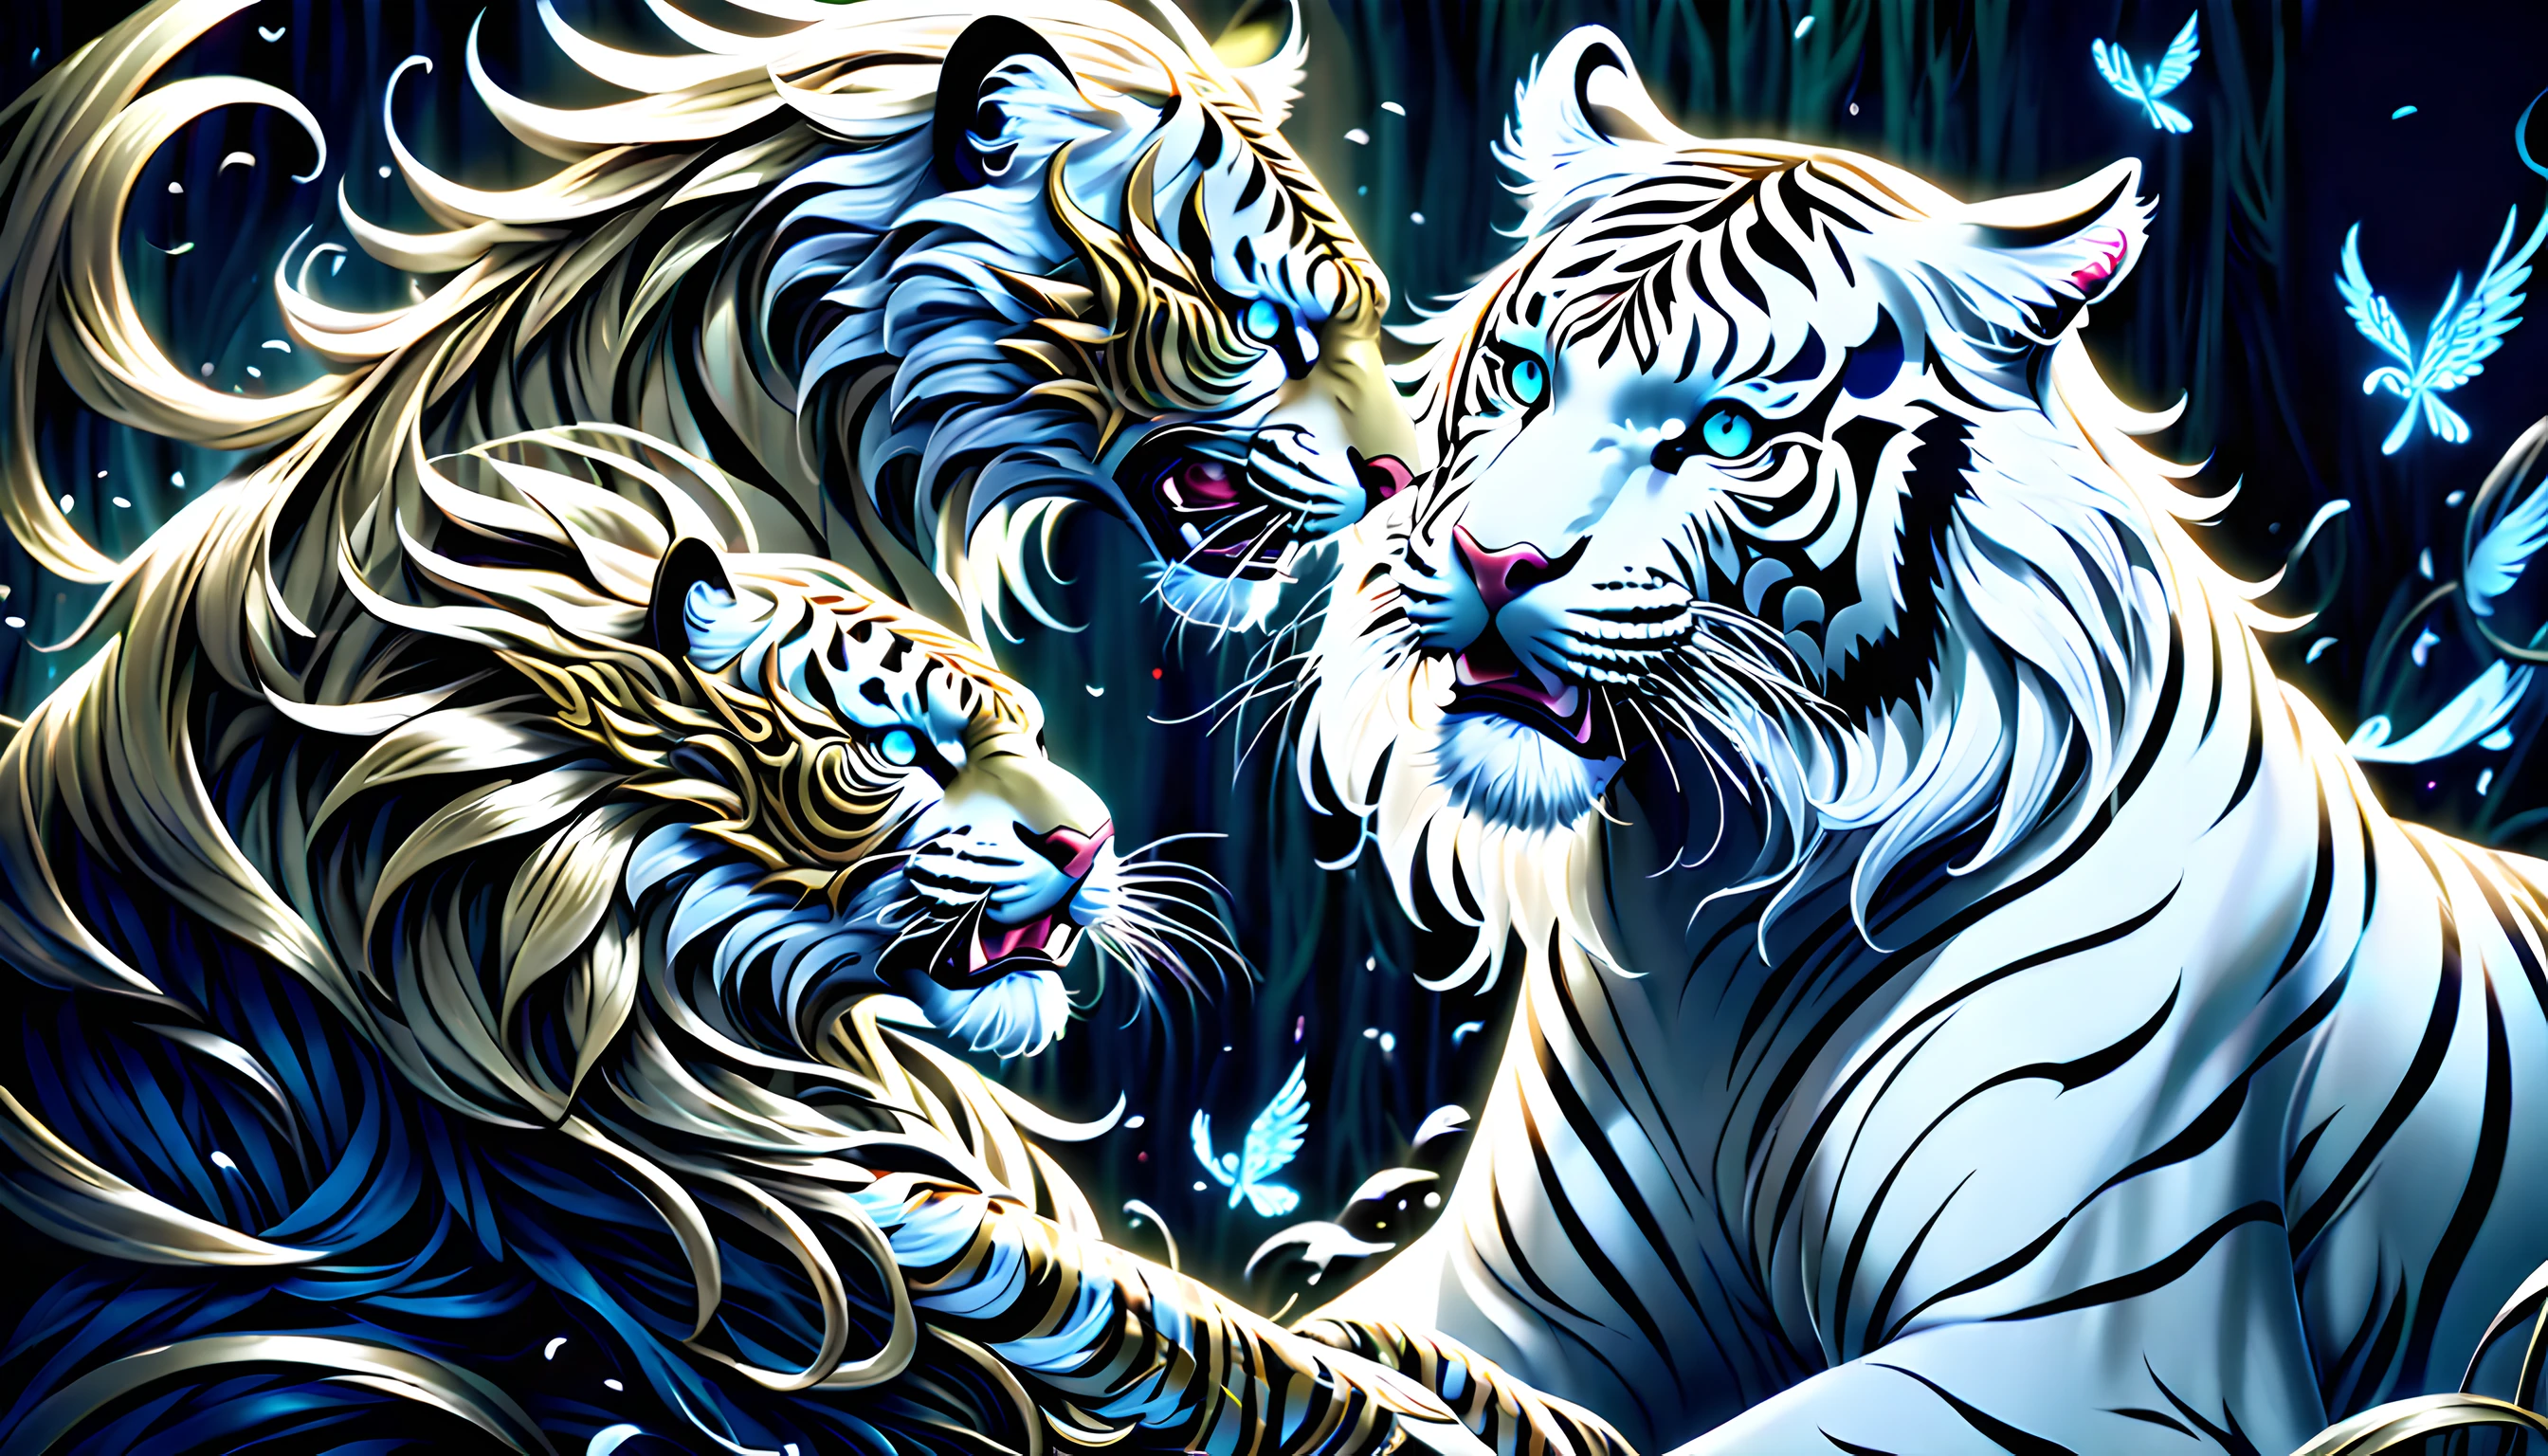 (((two characters intricate detailed digital illustration:1.5))), (((a fierce with powerful white_tiger:1.3))), (((dark fantasy of epic detail illustration:1.3))), (((extremely intricate detail brushstrokes of ride on knight girl with ornament sword:1.4))), (large and slant up eyes:1.1), beauty glow eyes, cinematic angle with still, featuring dynamic clash between atmosphere, rich colors, breathtaking beauty intricate detail, creative and interesting, intricate details and realistic 32k rendering, extremely intricate detailed, imagination breathtaking realm dark fantasy, enchanting of dark fantasy environment, surrealism background, intricate details and flawless quality, high contrast masterpiece, delivering a visually stunning, dark fantasy and fantasia harmony, exquisite high-definition drawing, limitlessly high resolution, (sharp resolution:1.1), (((all captured in sharp focus:1.2))), (((rendered in stunning 32k resolution:1.4))), (((beautiful detail glow:1.3))), impeccable quality, (((highest quality:1.4))), highly quality, best quality, (((extremely insane detail:1.4))),